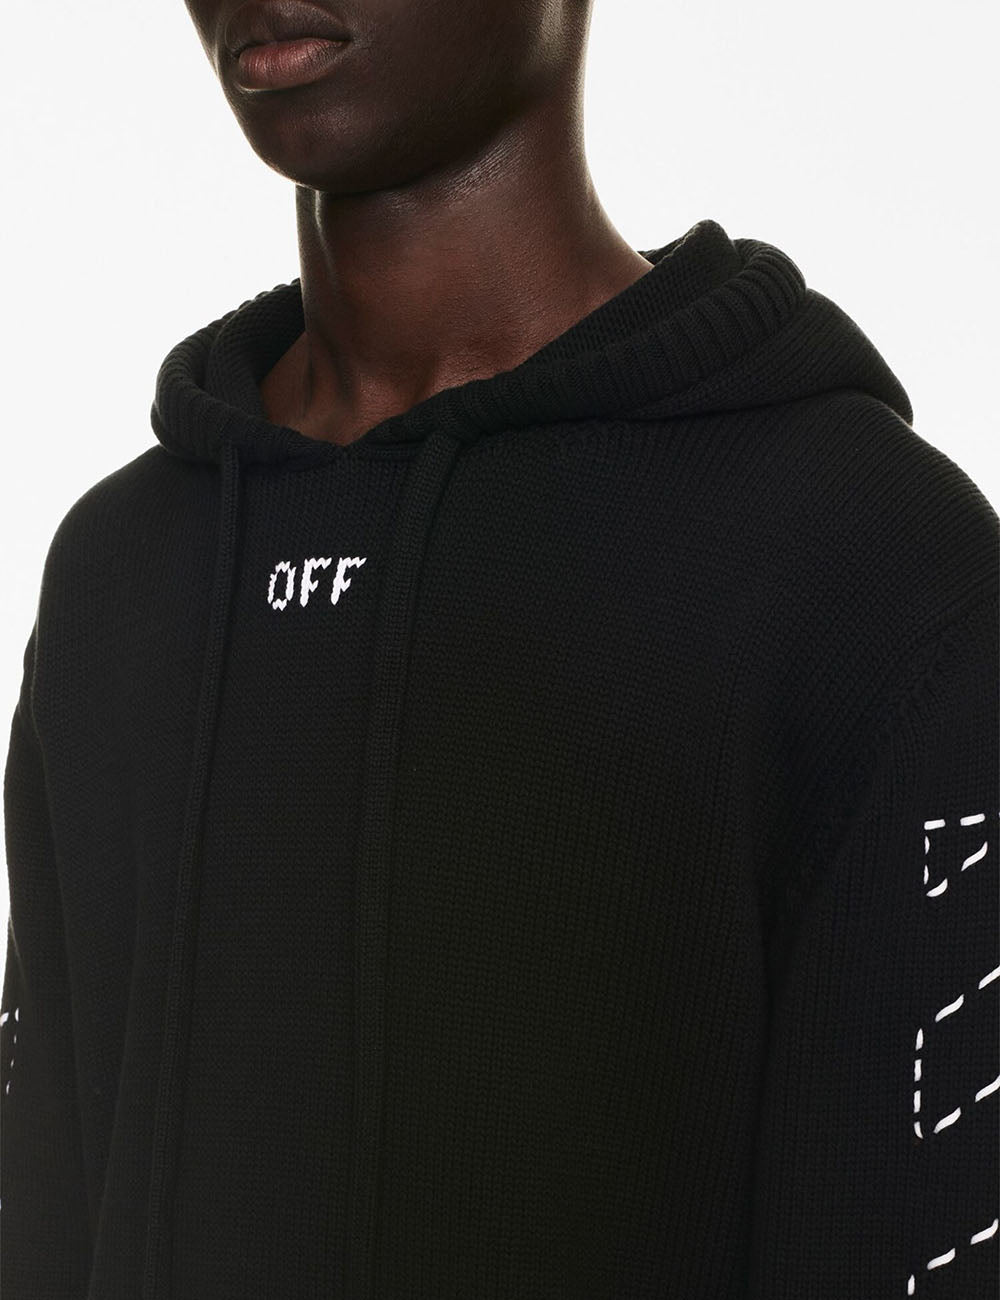 OFF WHITE STITCH ARR DIAGS KNIT HOODIE